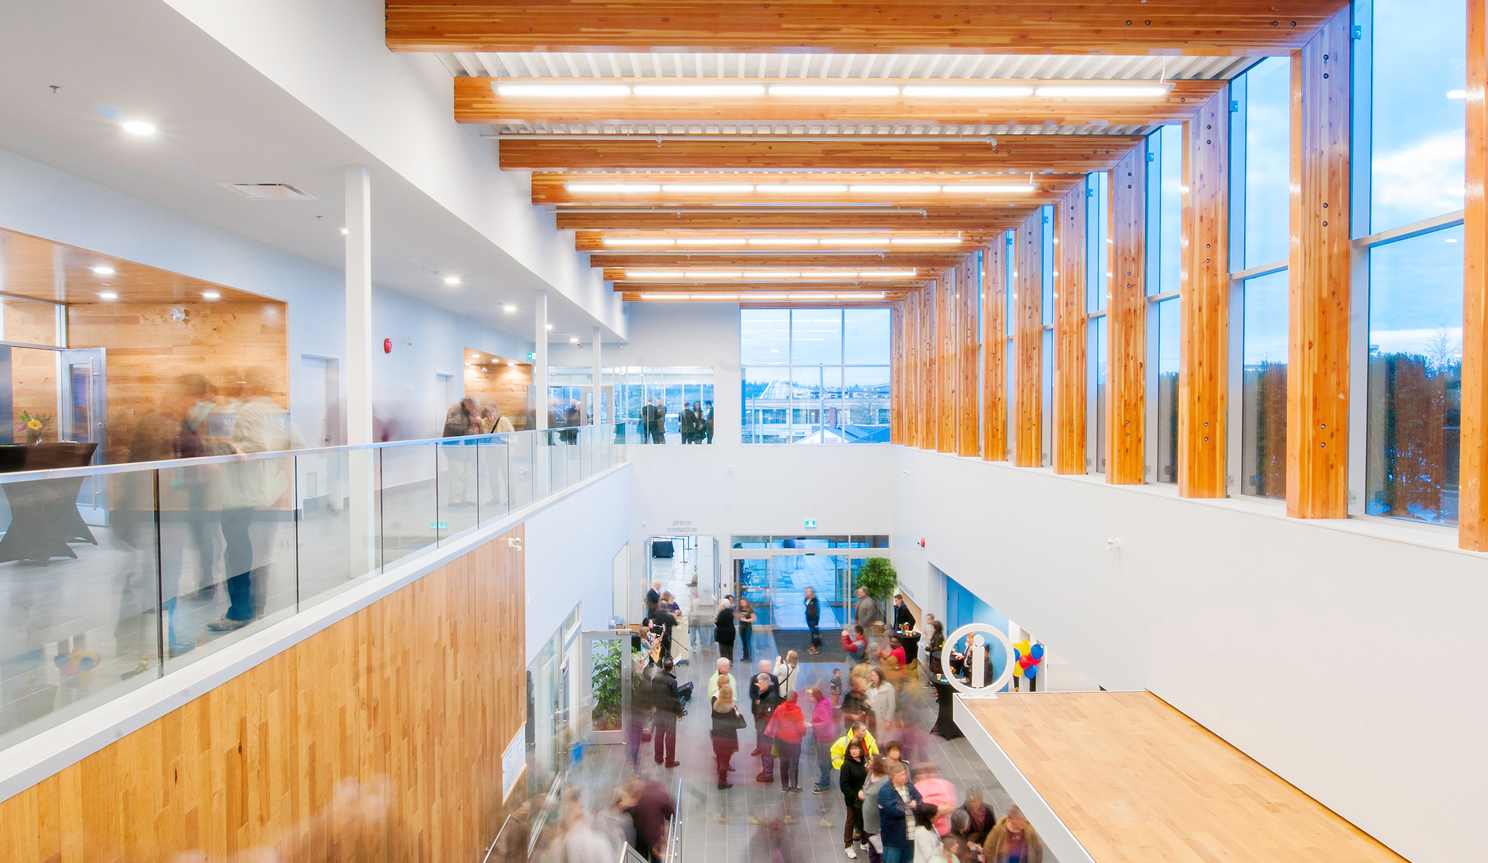 Interior view looking down from the second level of Timms Community Centre with people. The combination of natural, bright white interiors, and large windows make the space feel open and welcoming.